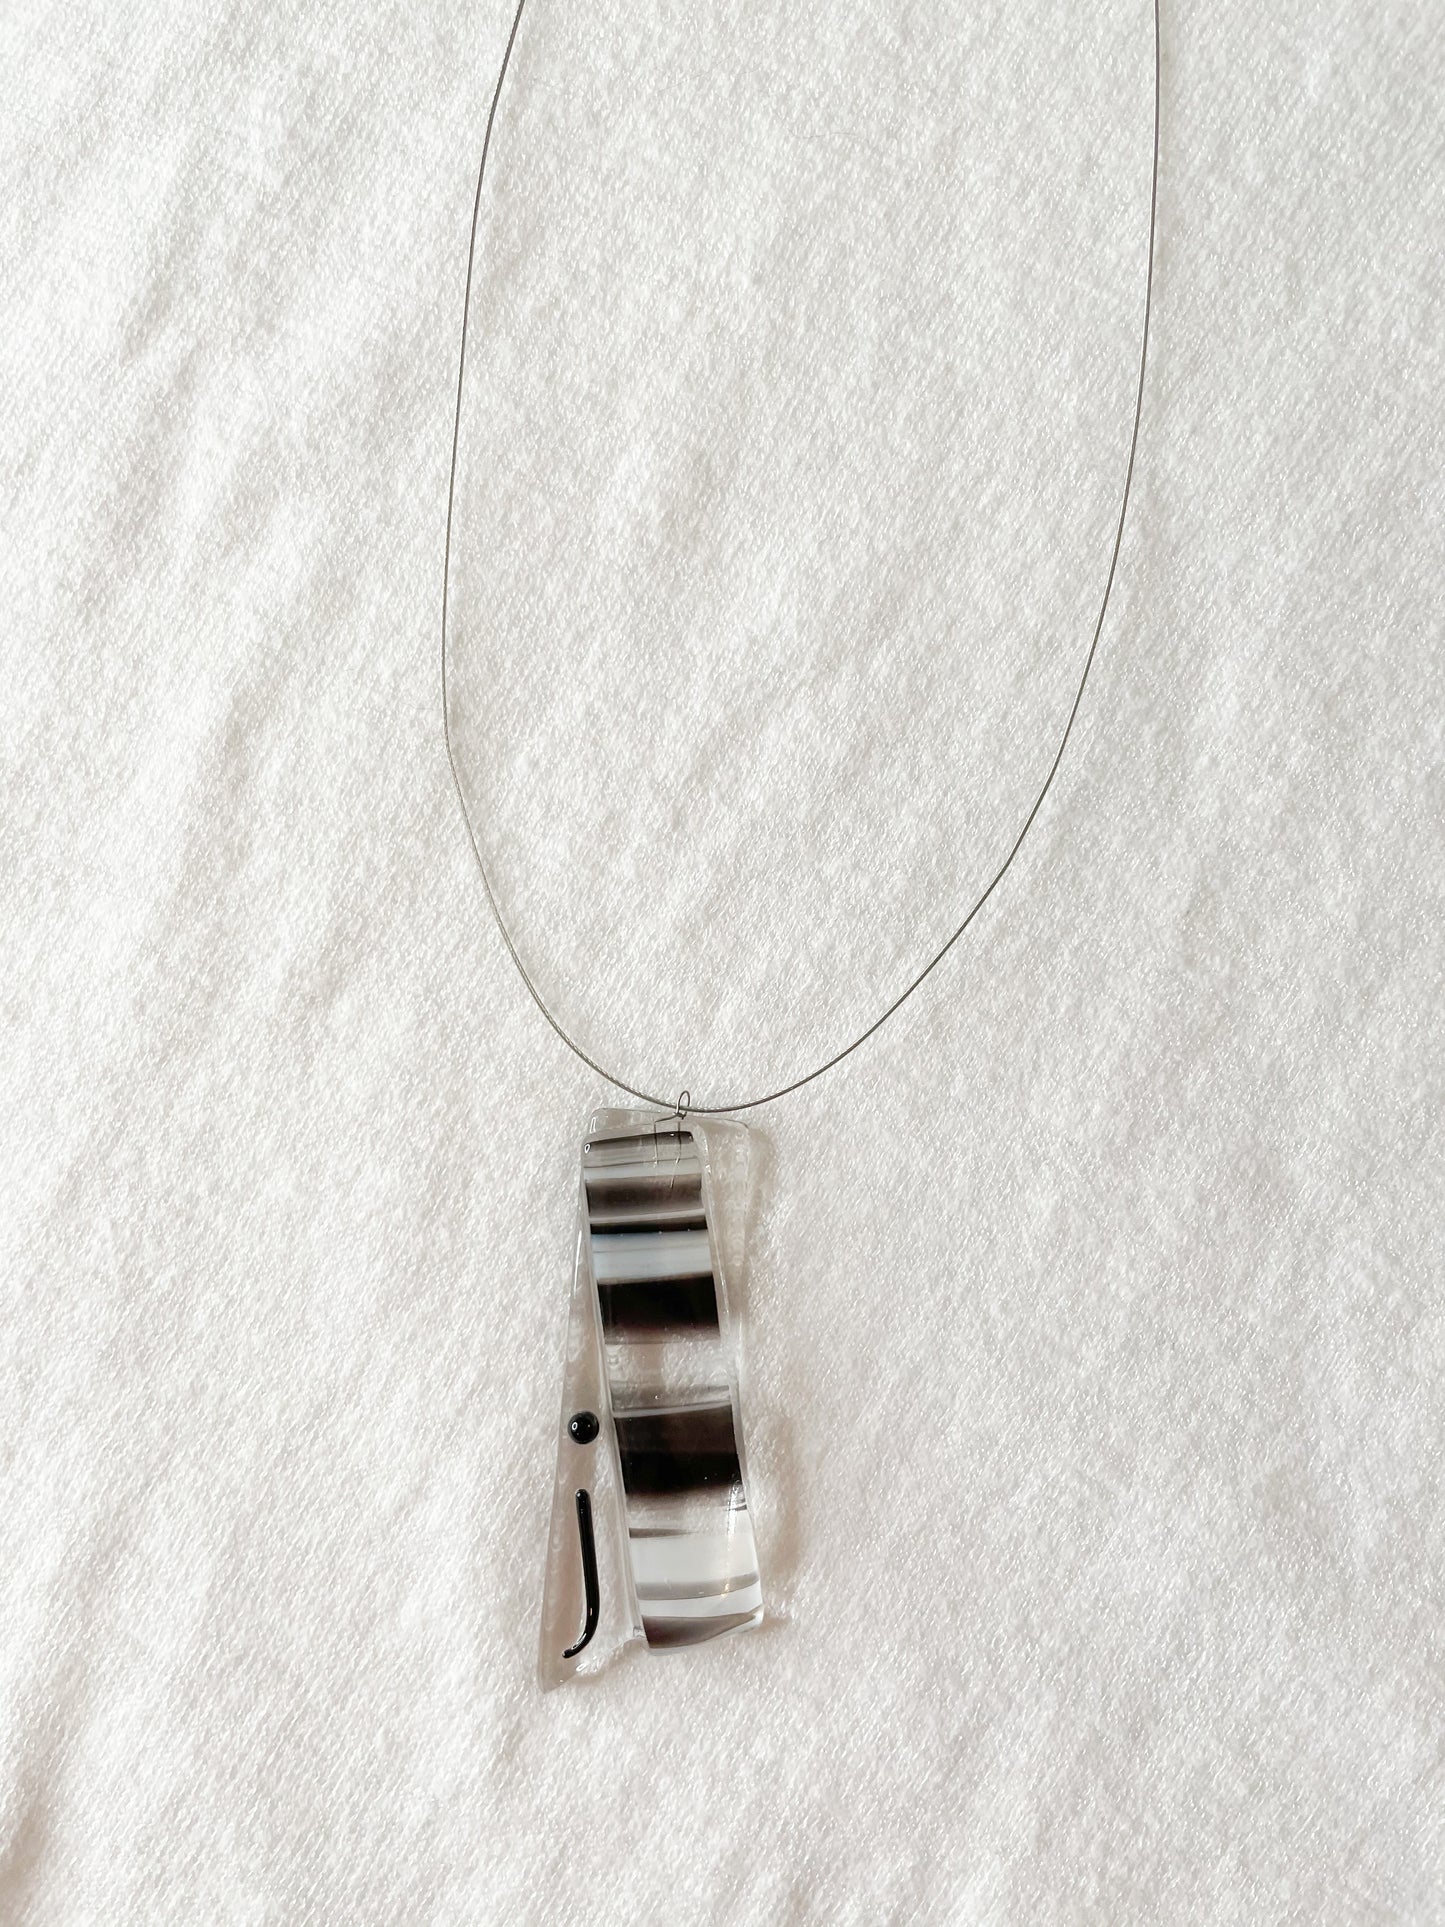 Calgary Artisan Made Wire and Glass Necklace